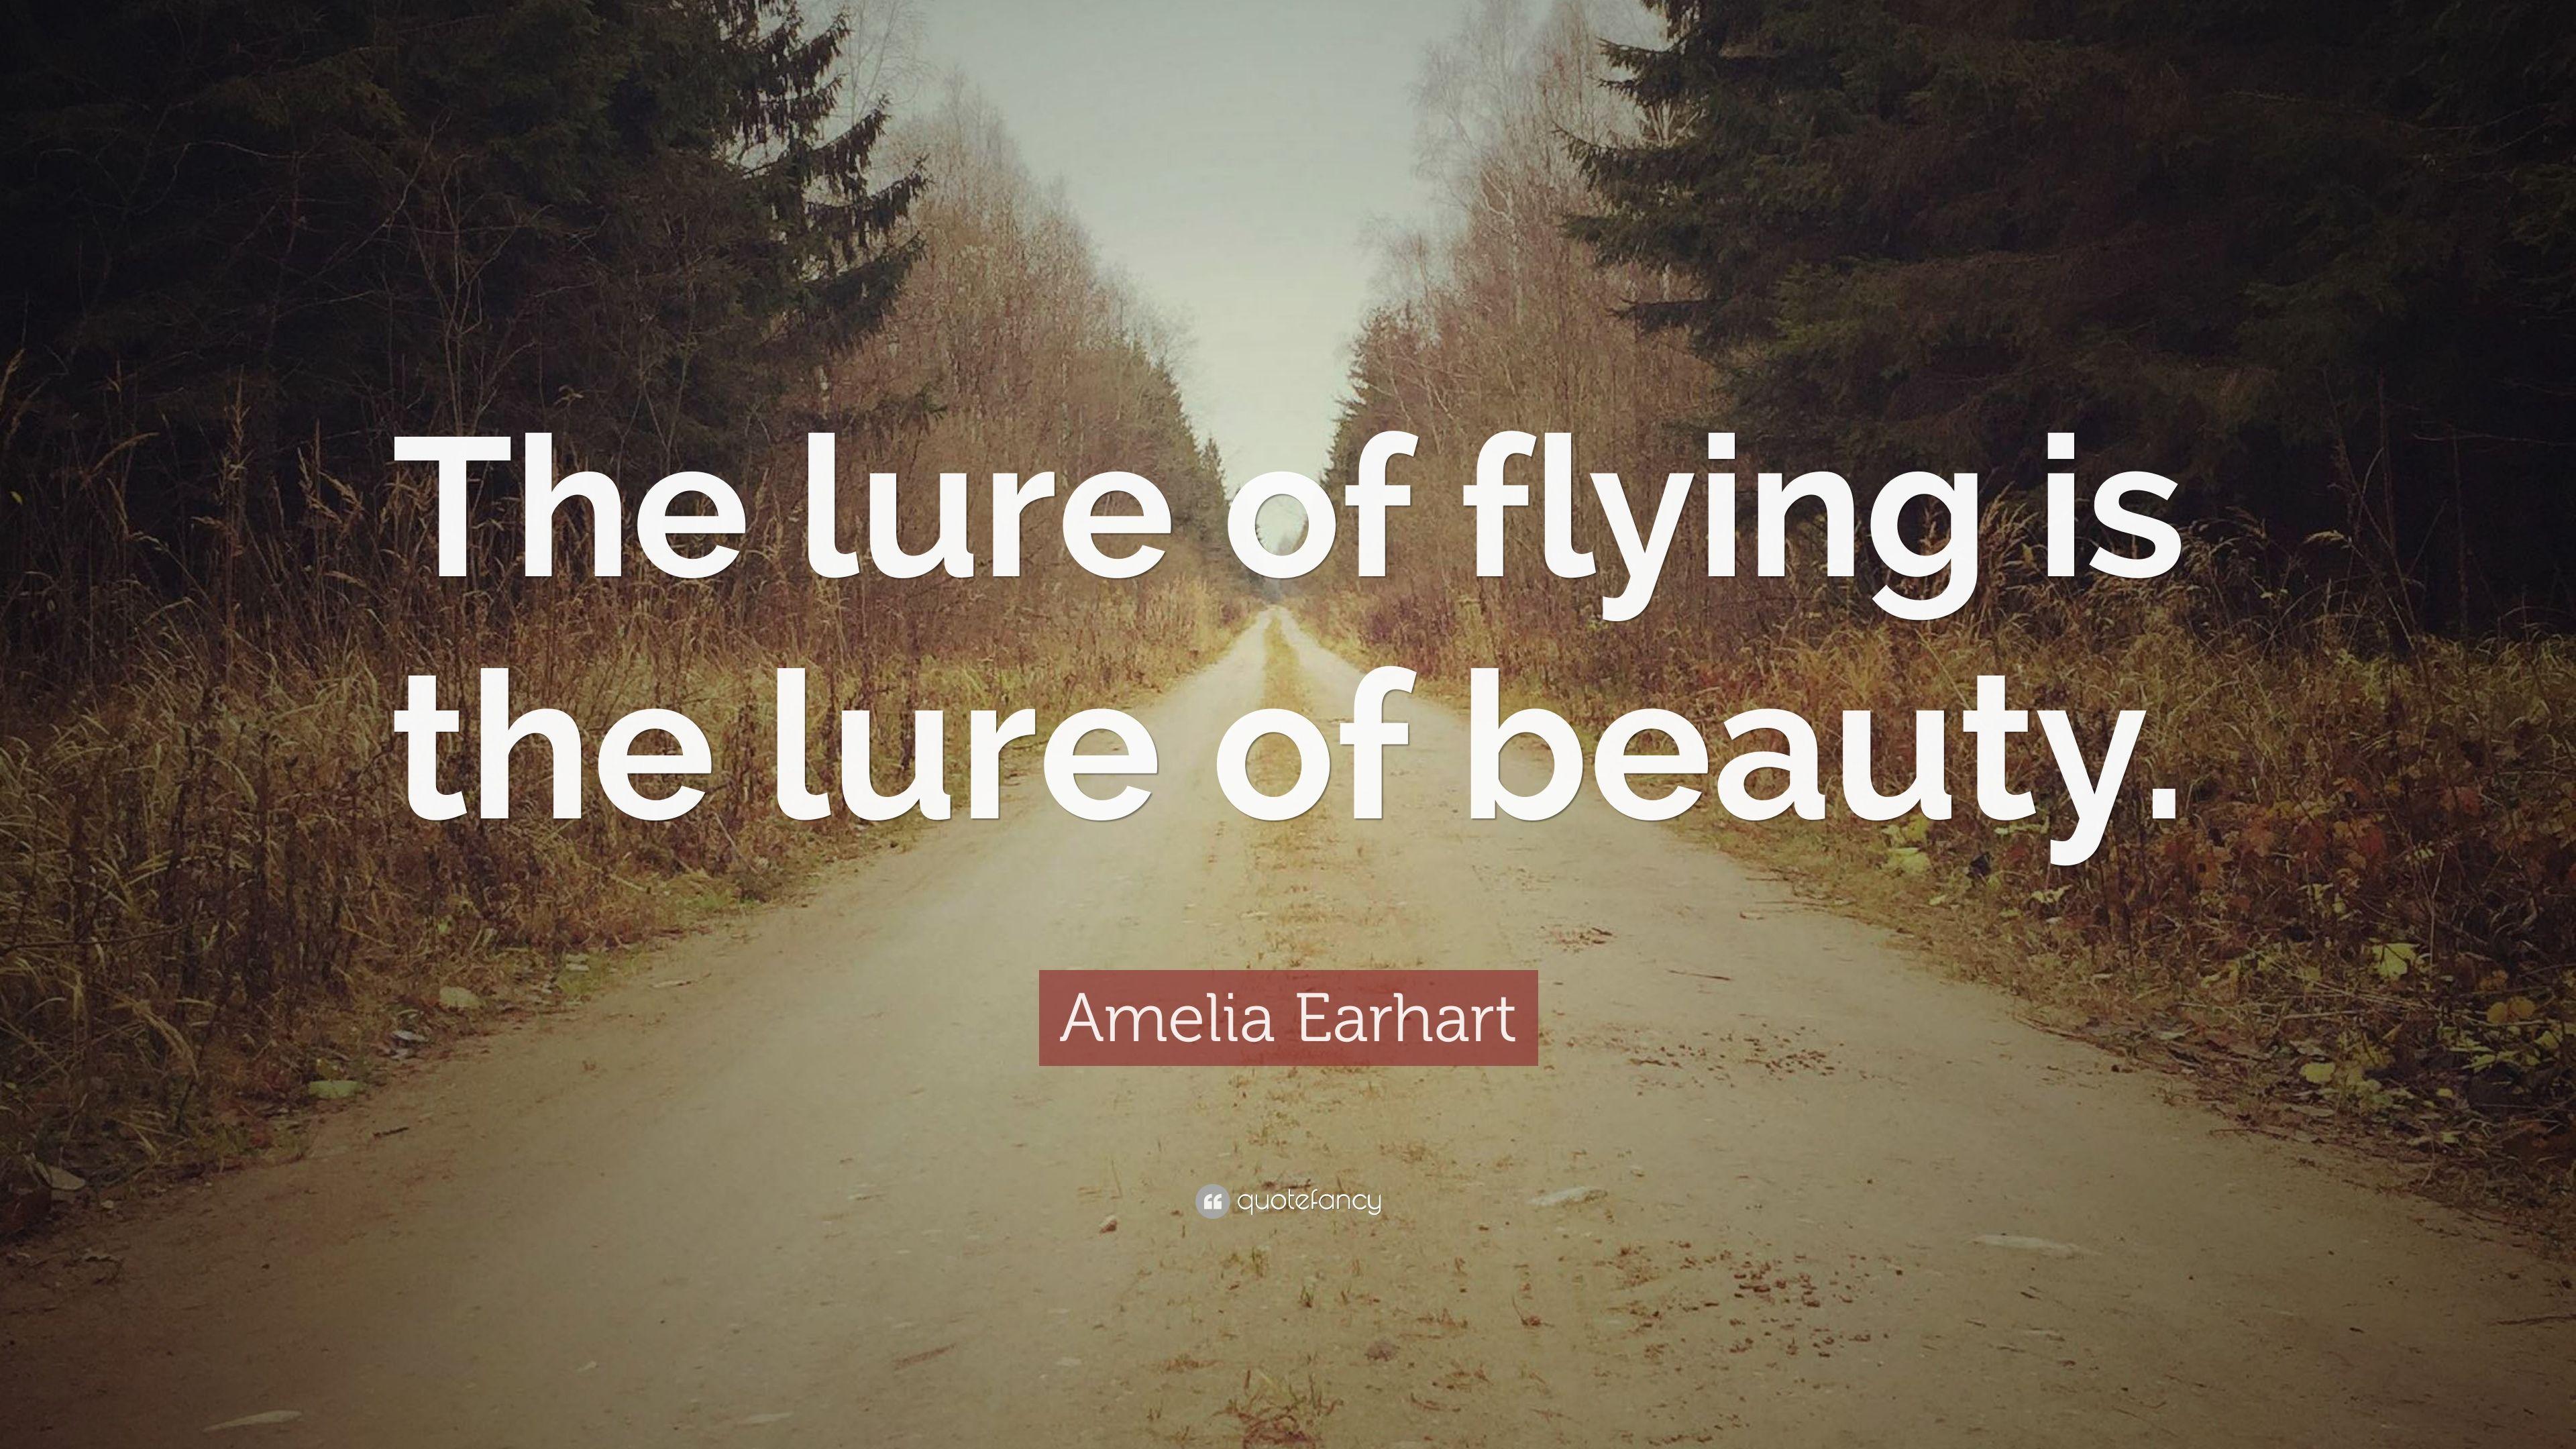 Amelia Earhart Quote: “The lure of flying is the lure of beauty